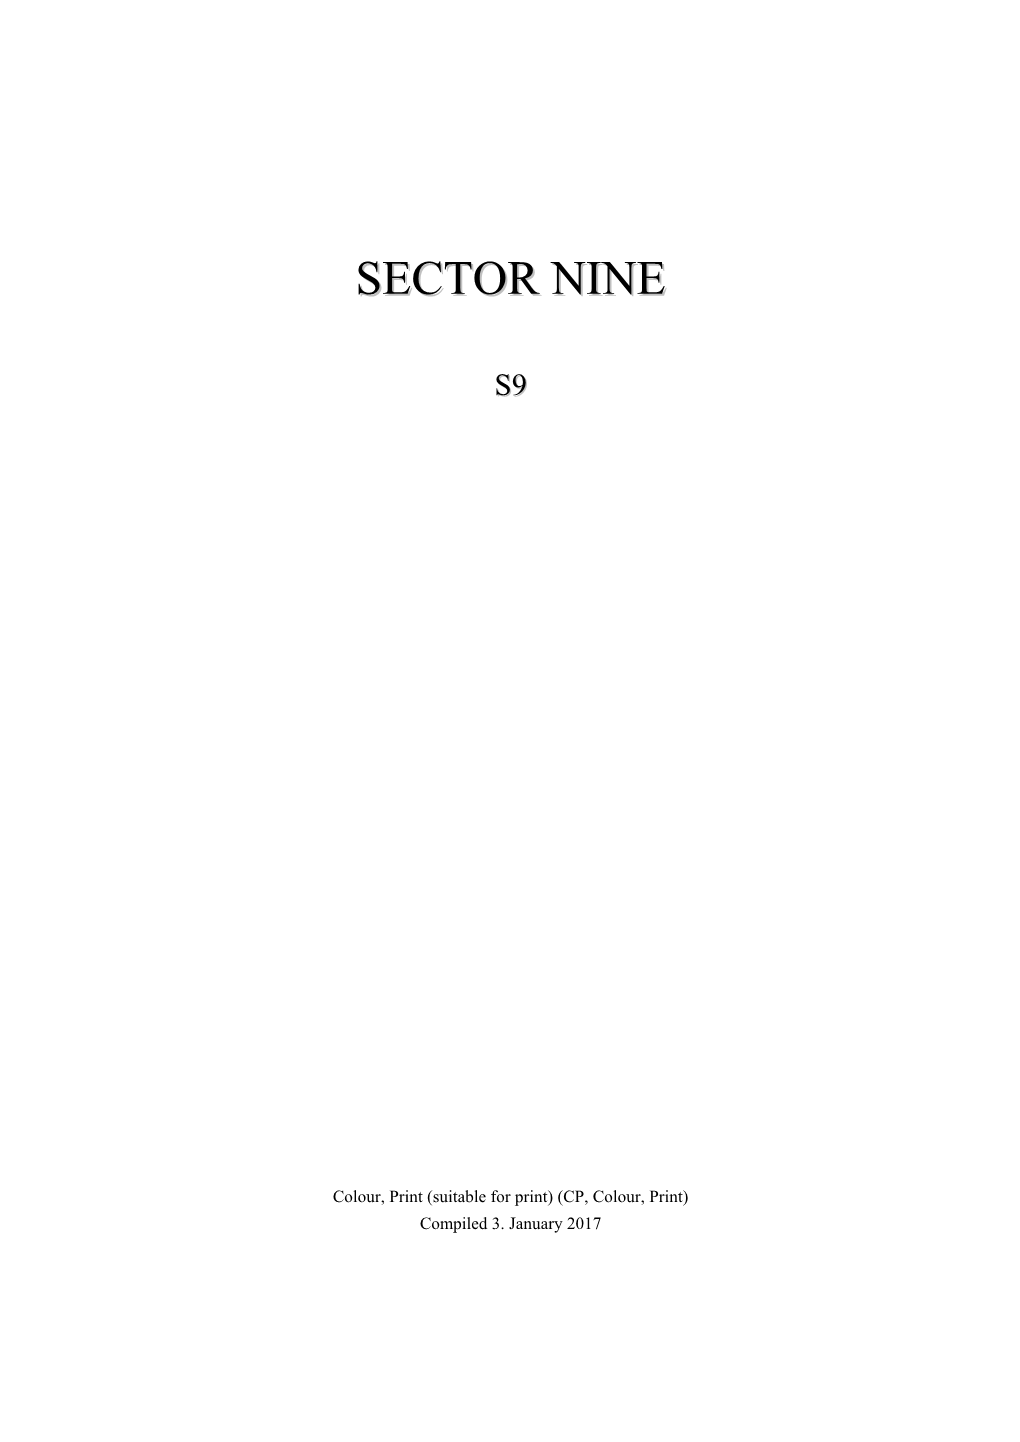 SECTOR NINE II S9 A) Table of Contents, in Checksheet Order